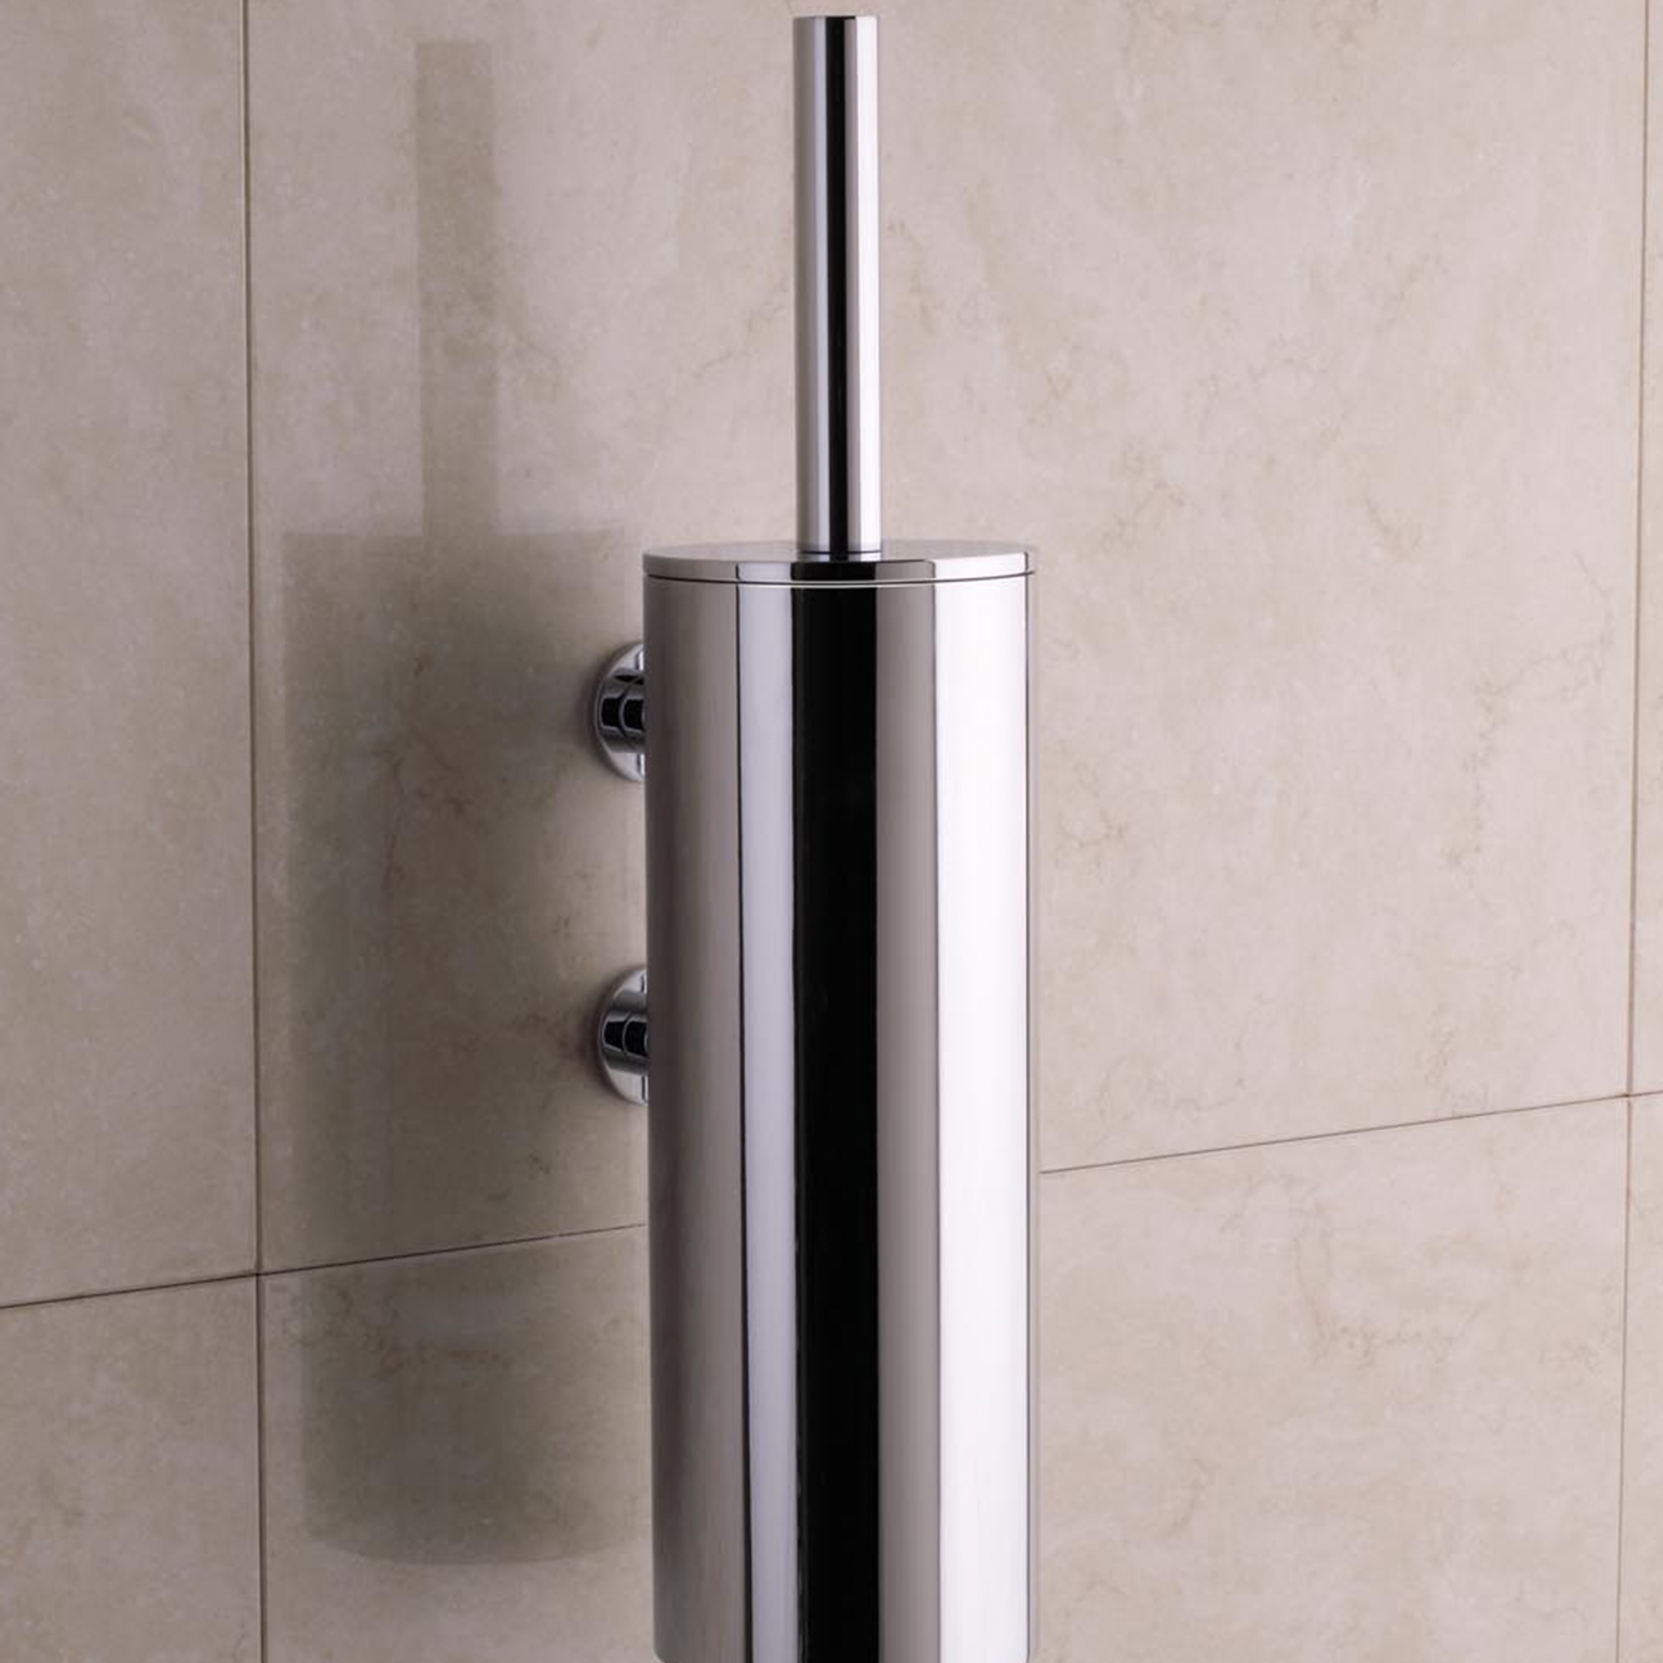 Vola T33 Toilet brush holder VOLA AVAILABLE COLORS 16 POLISHED CHROME